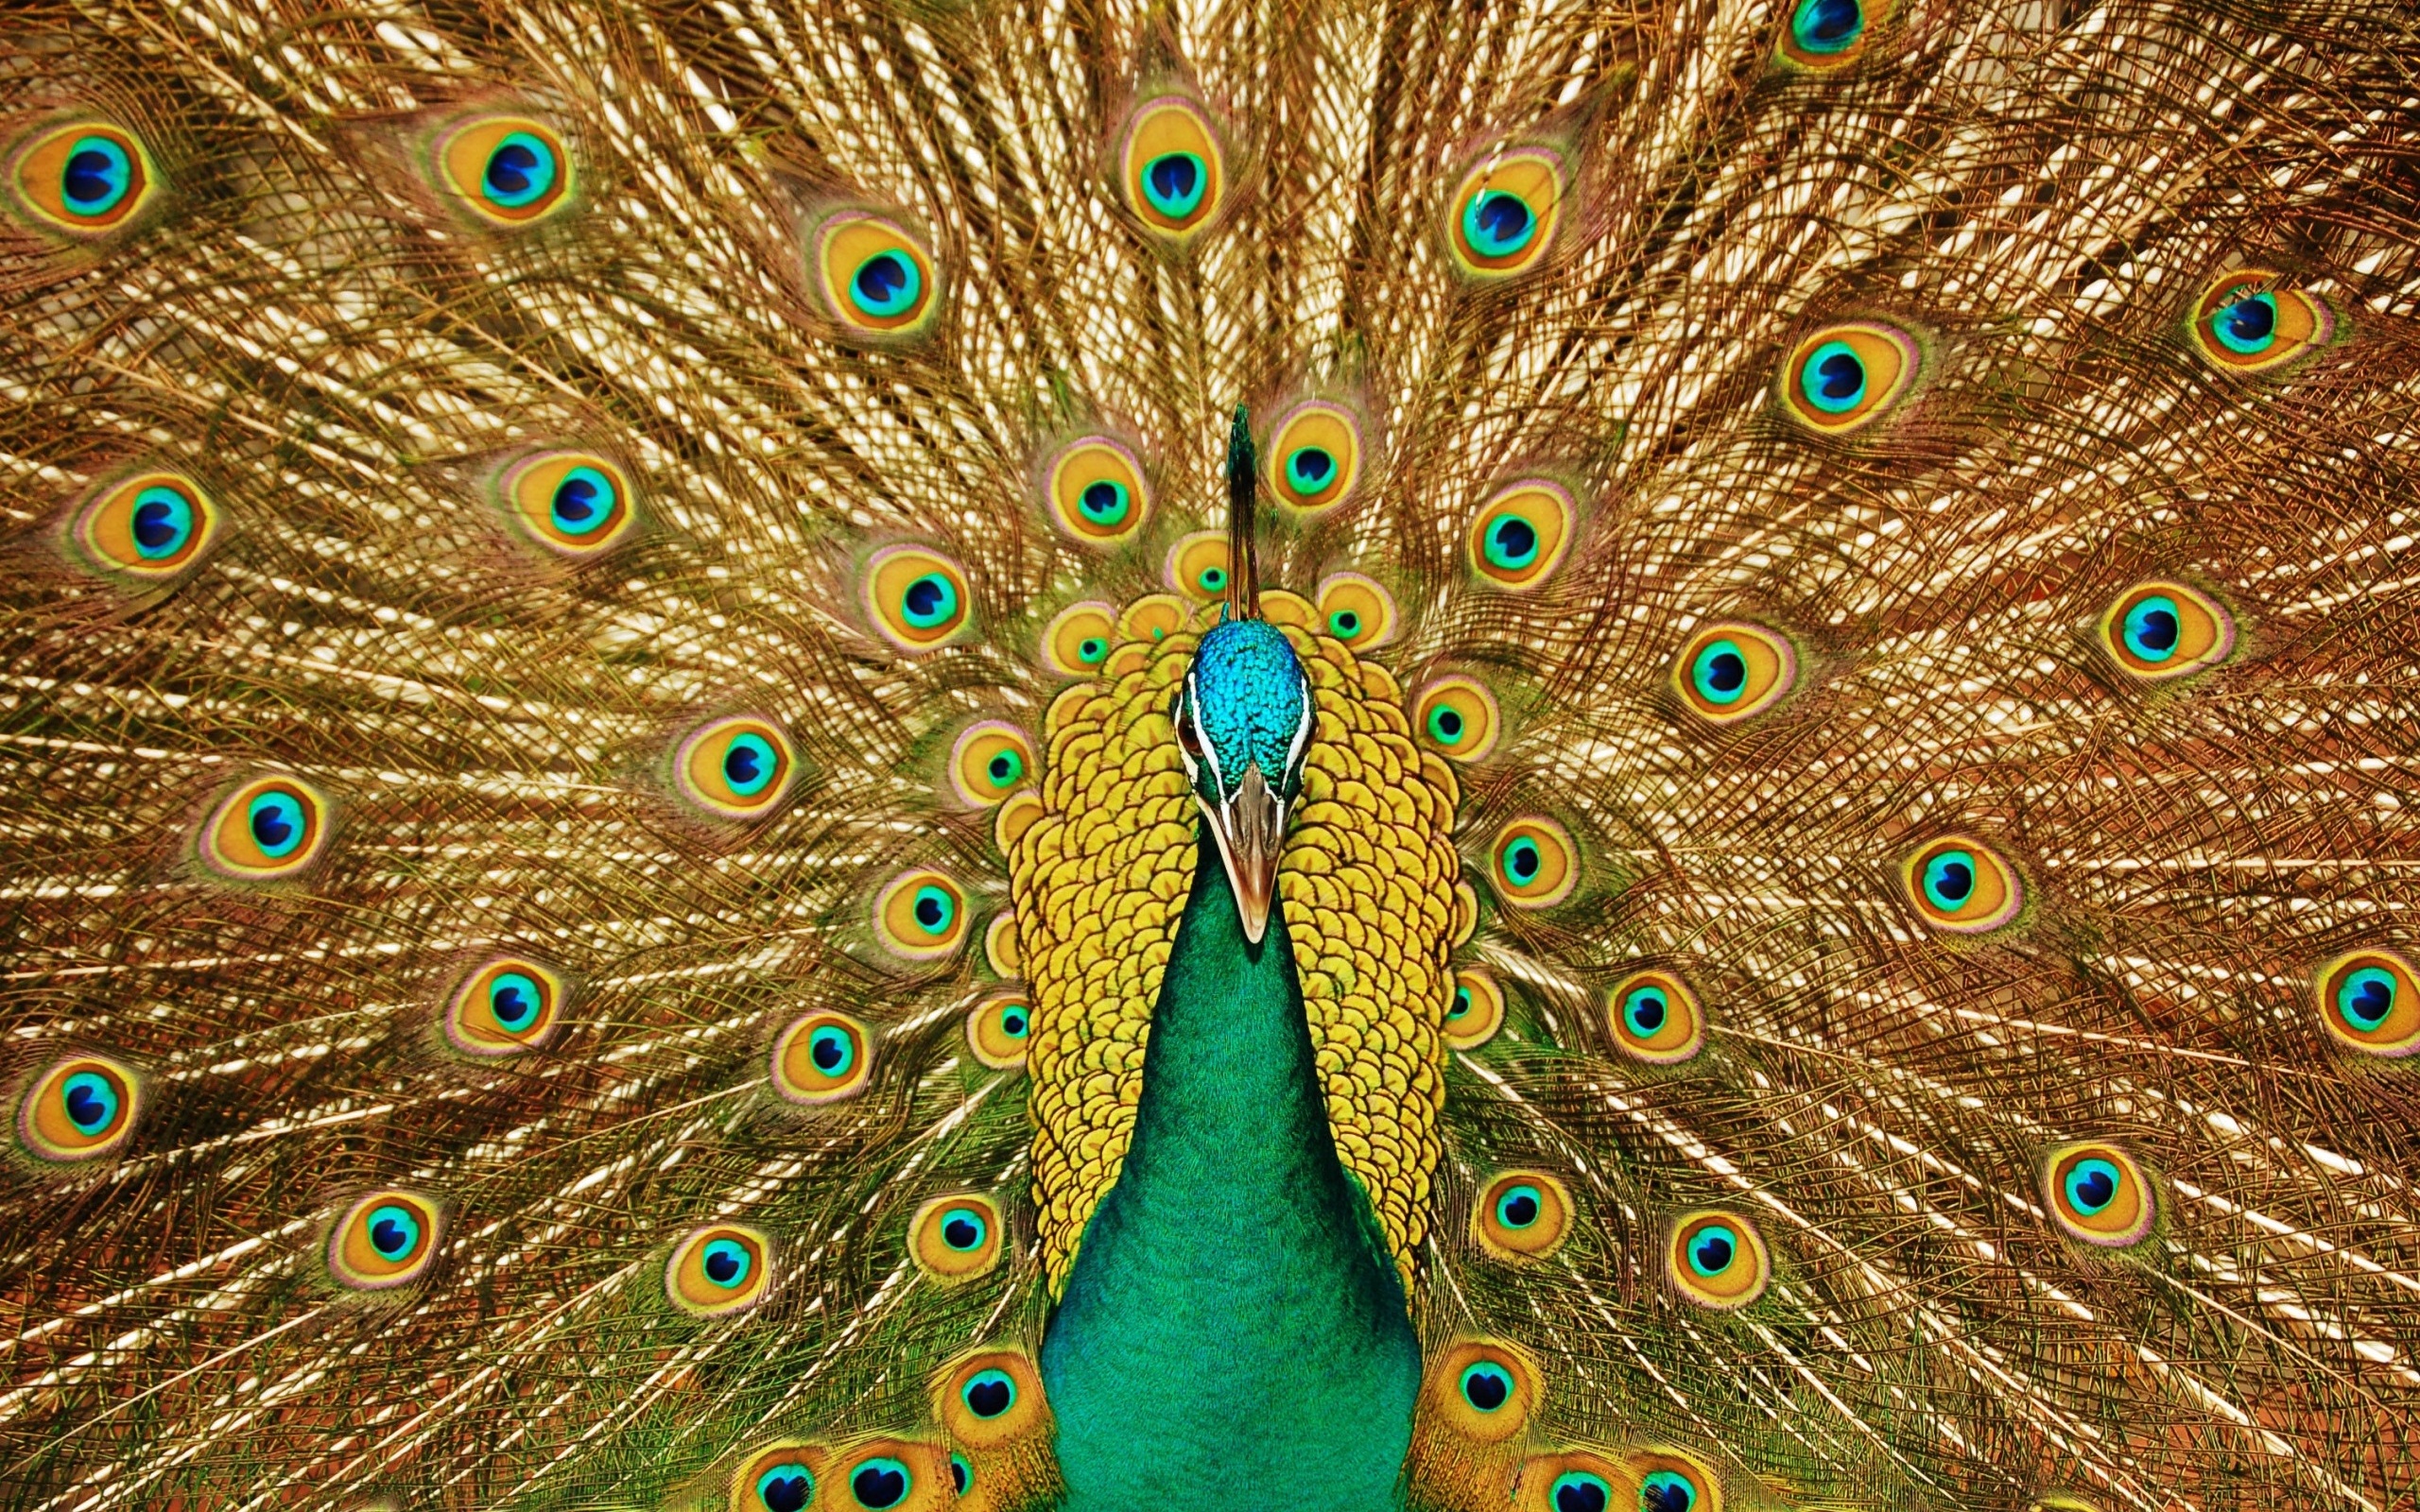 Best Beautiful Peacock HD Image Photos And Wallpaper